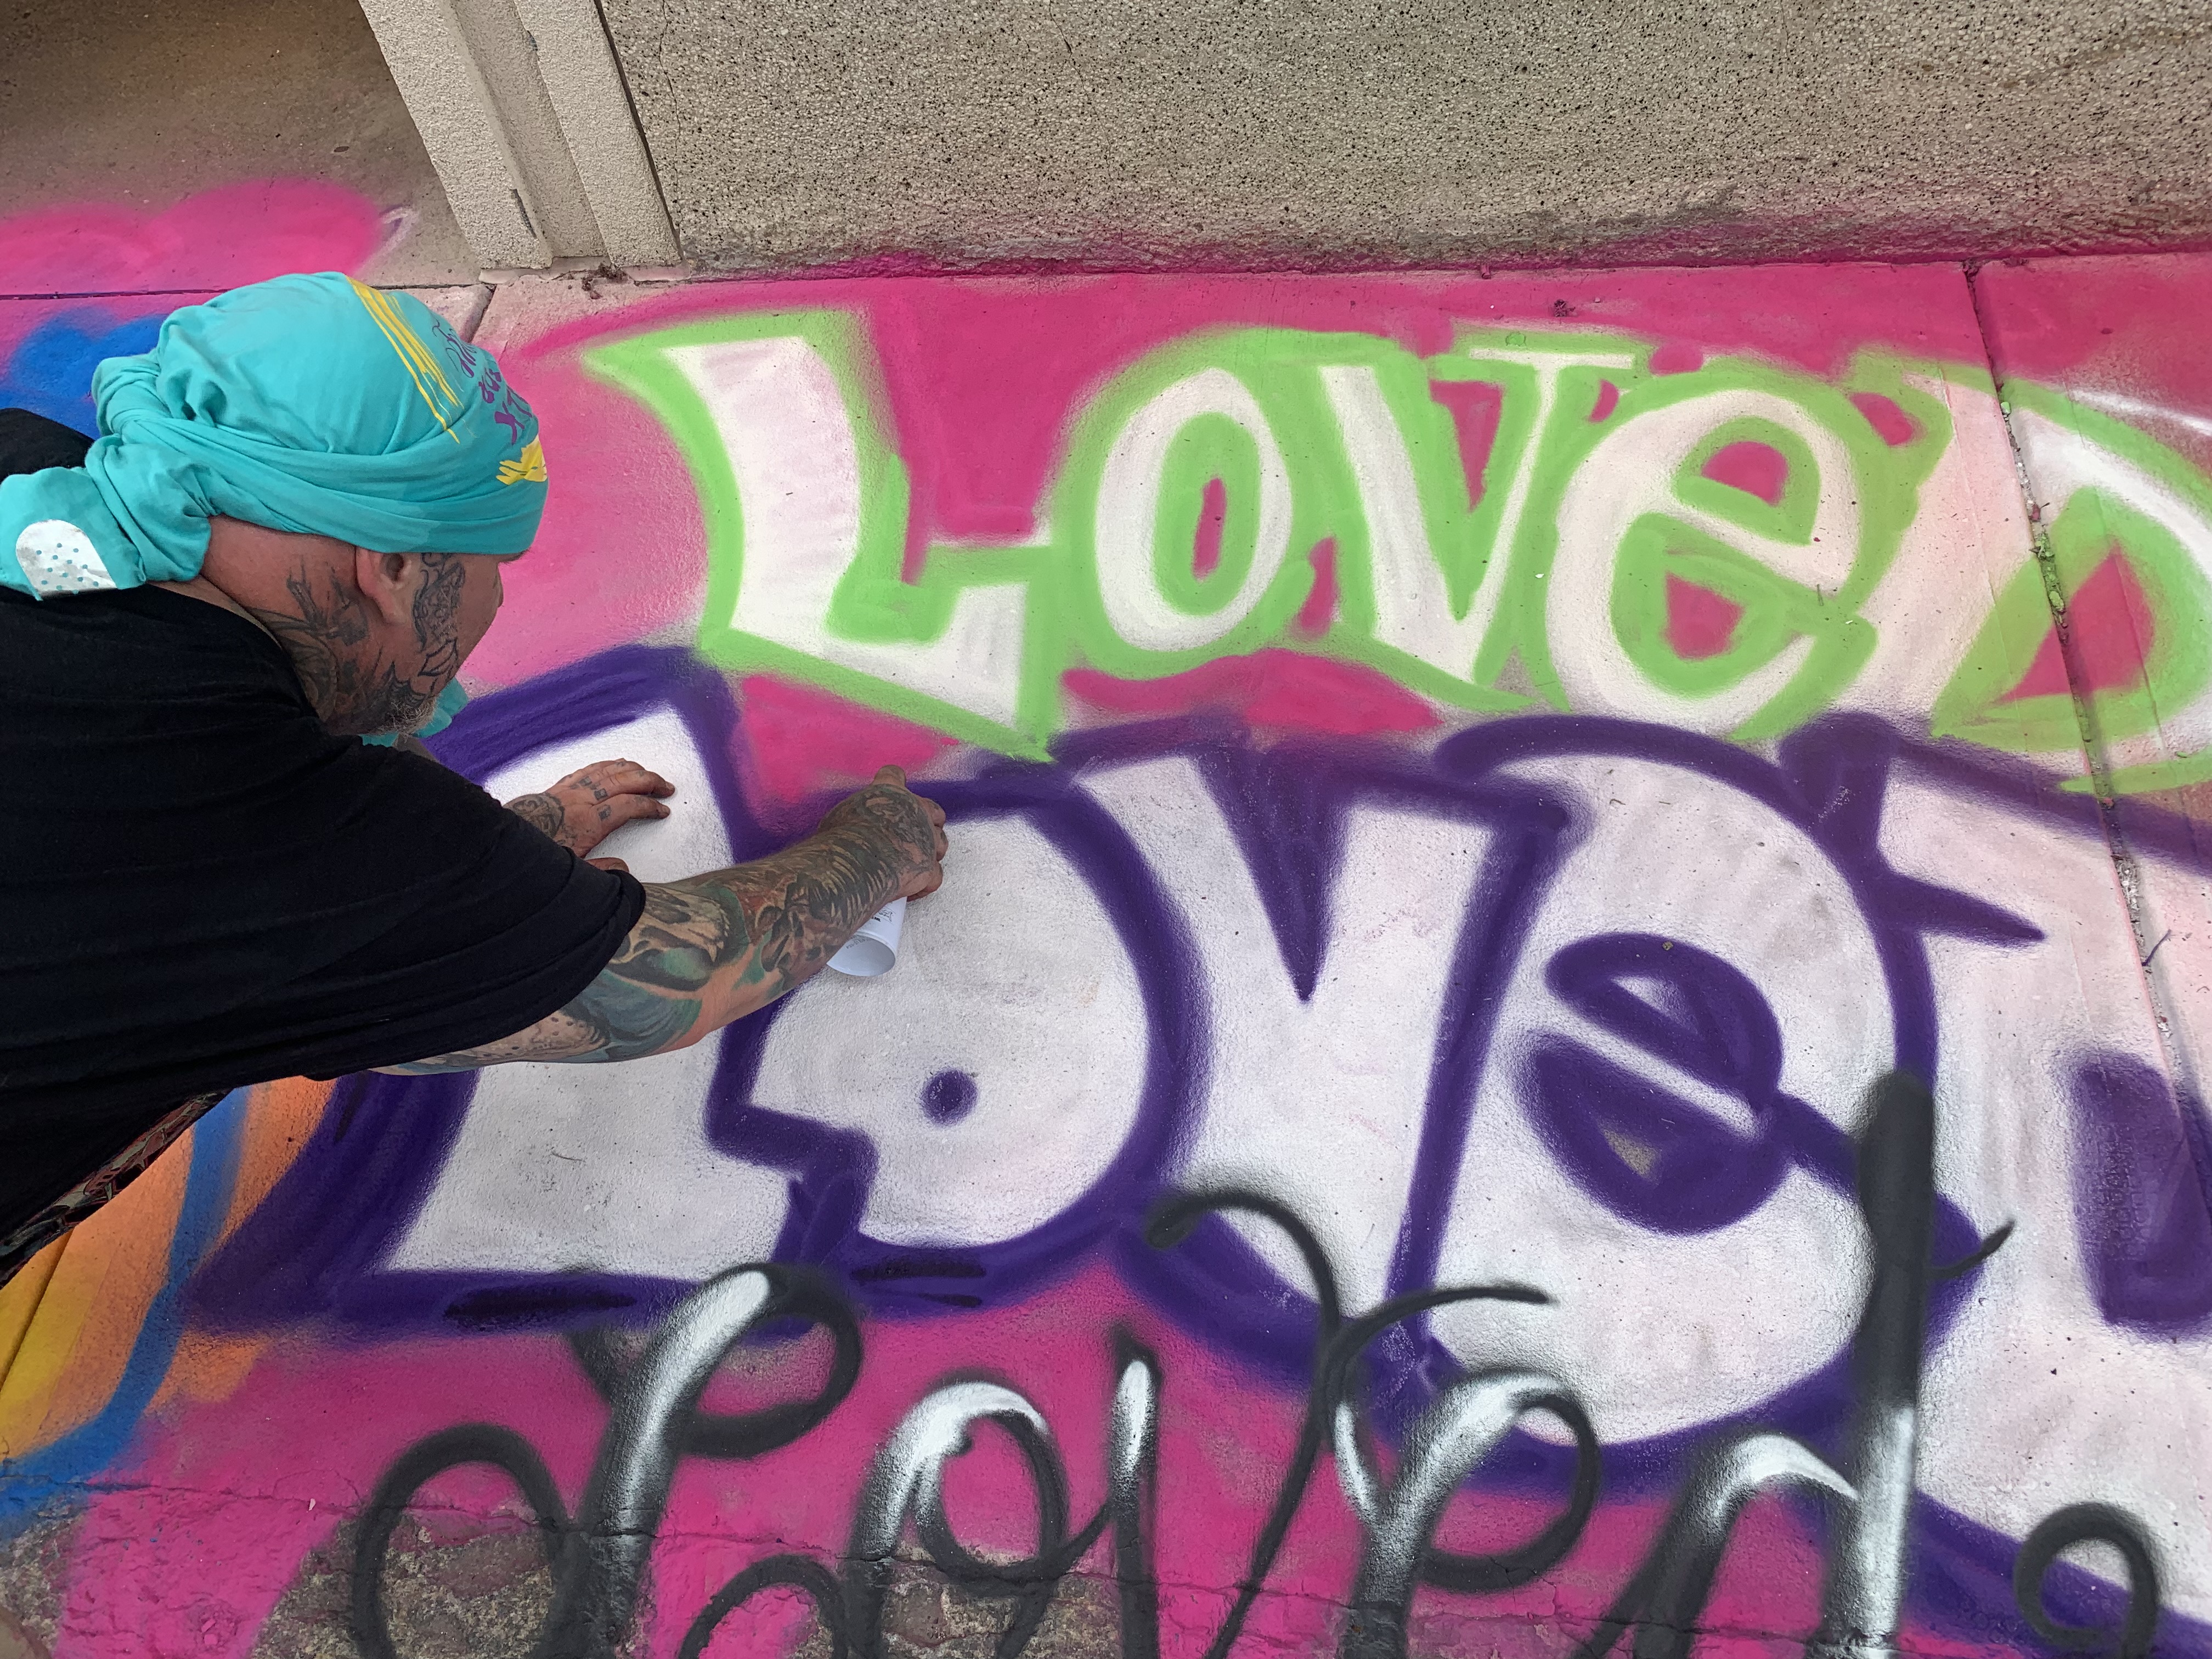 A man spray paints the word "loved" on a pink sidewalk.